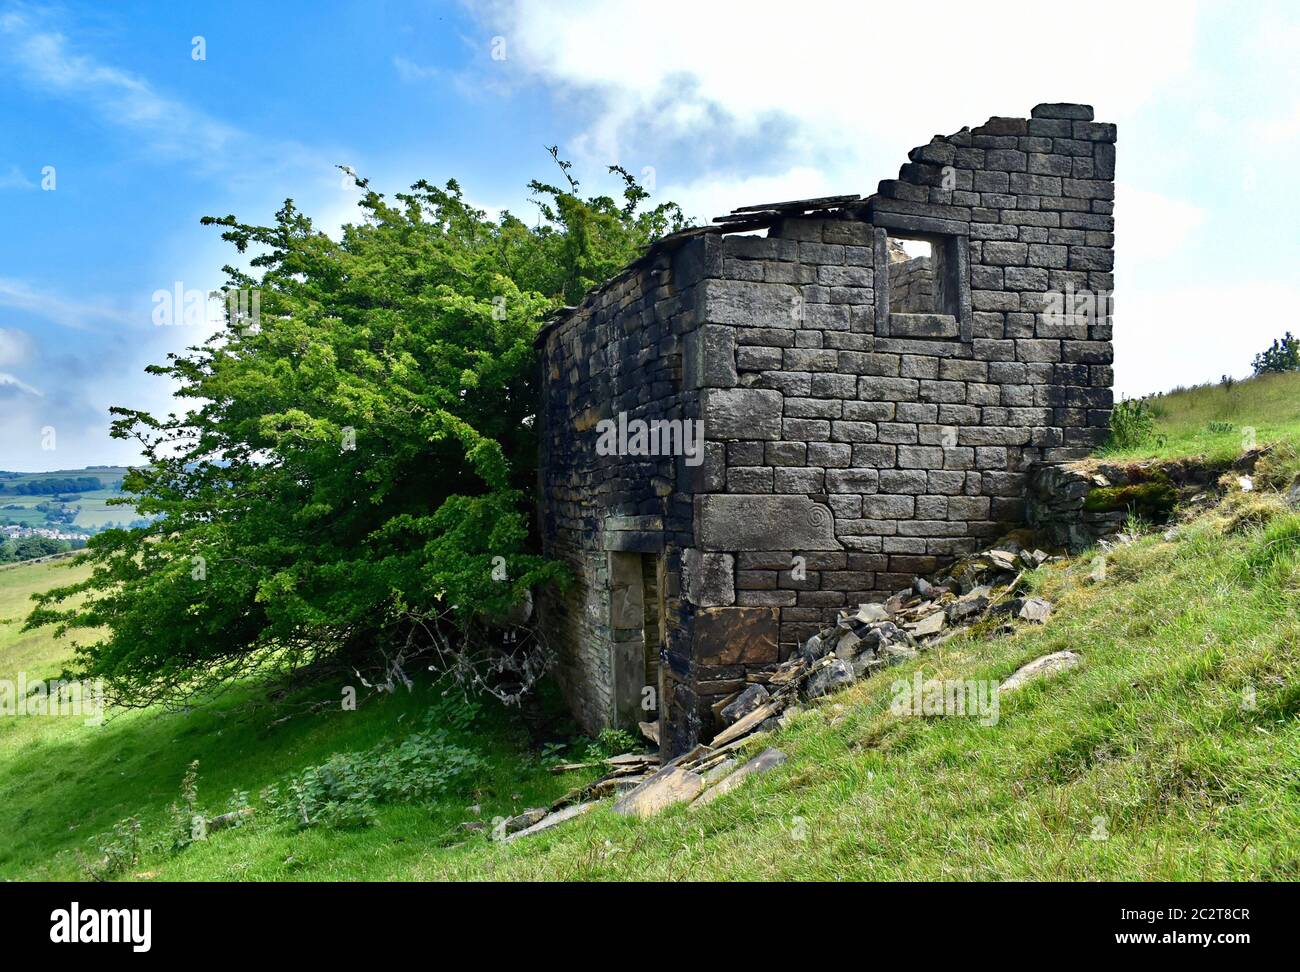 Disused and abandoned old farm building. Stock Photo